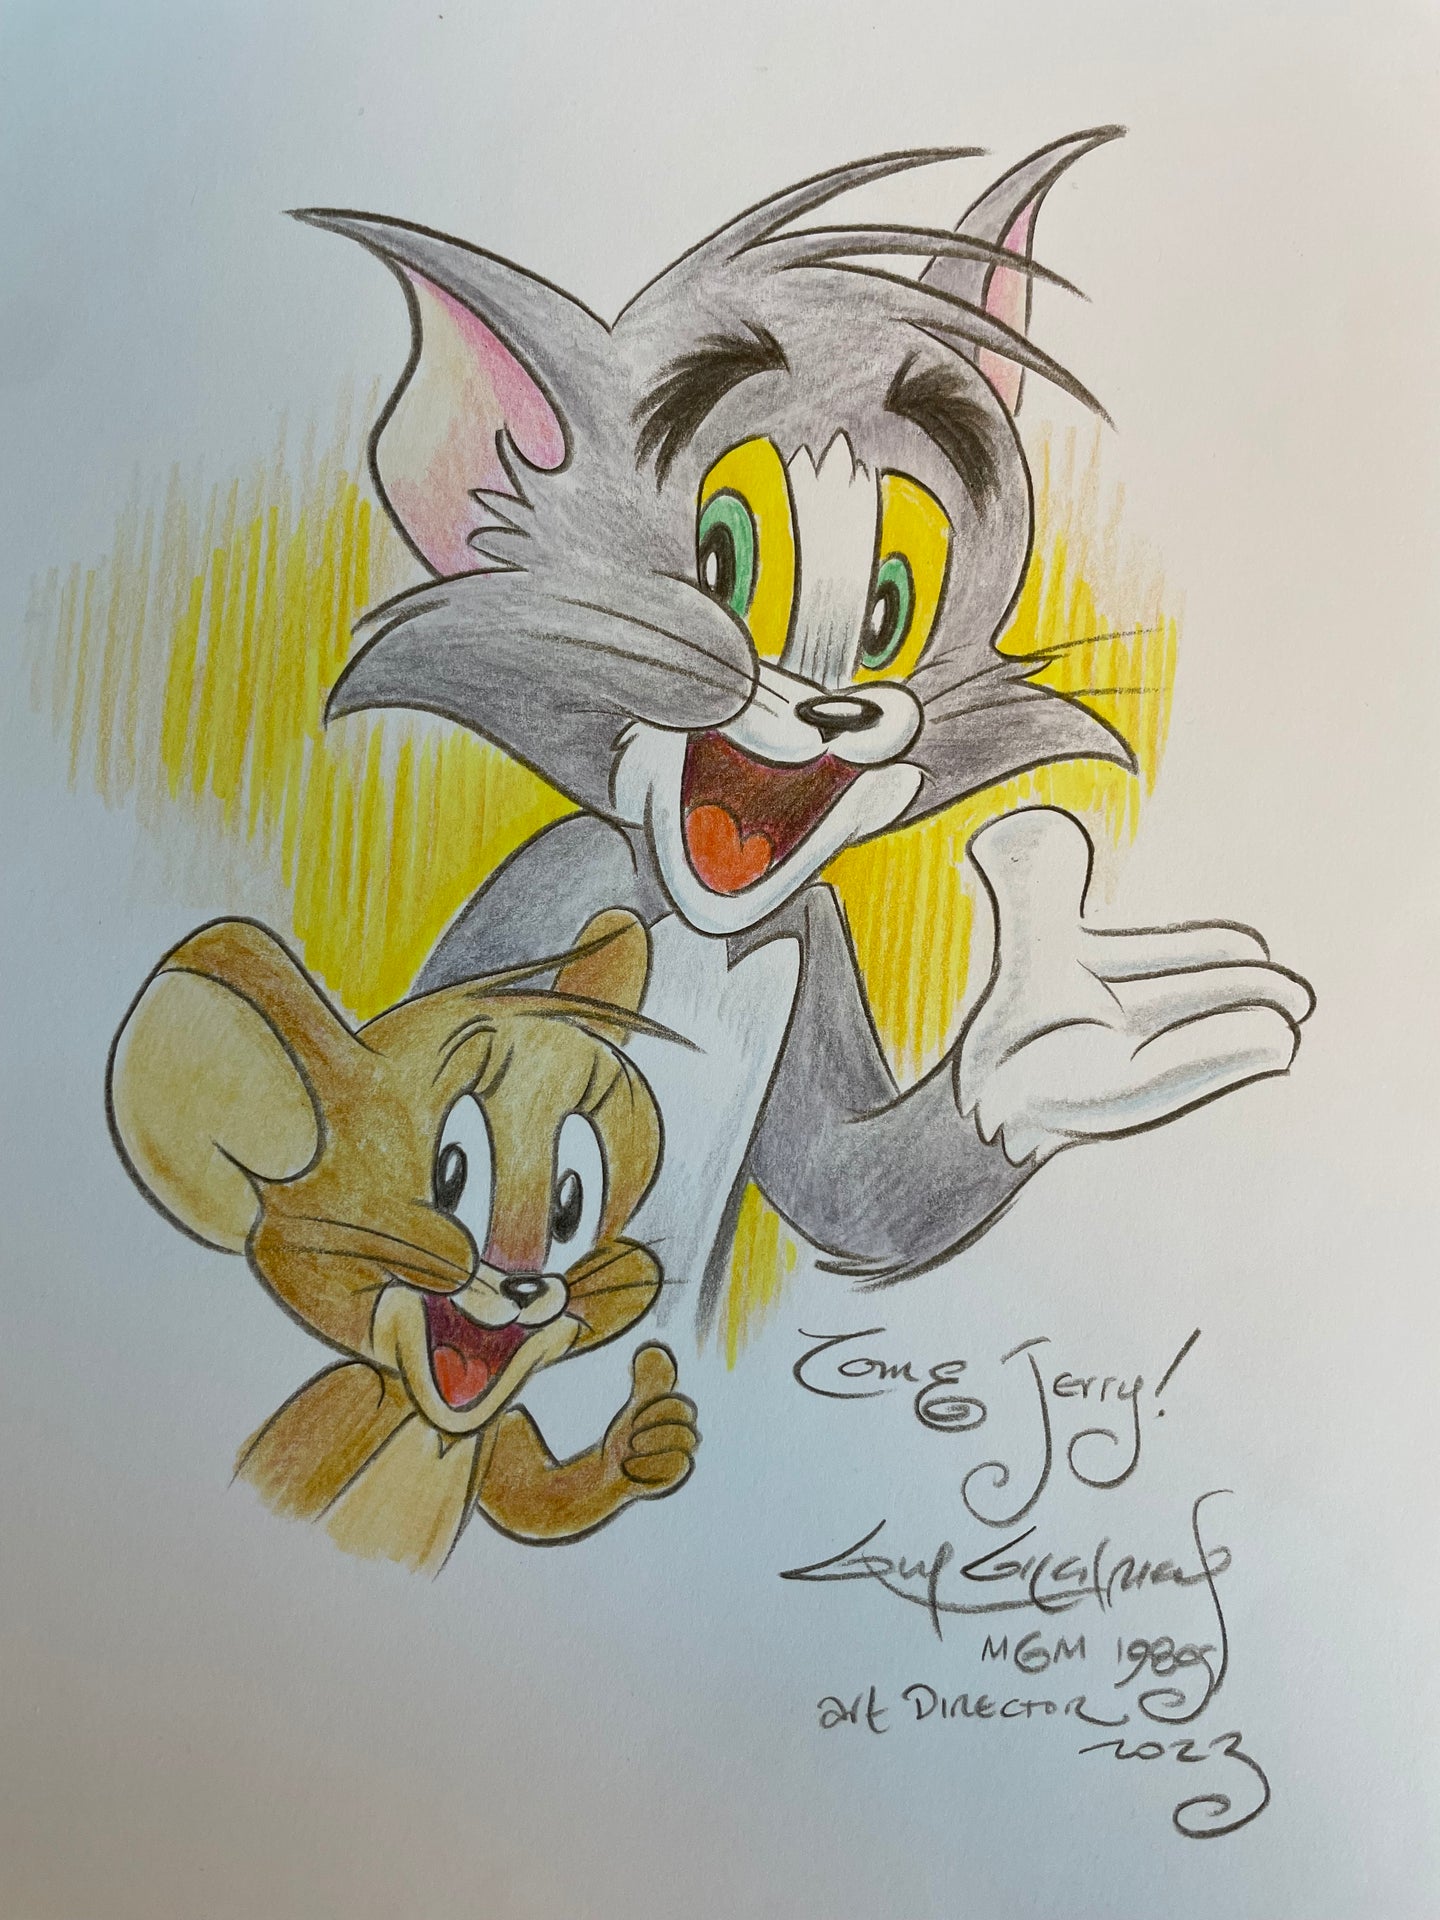 Tom & Jerry Original Art 8.5x11 Sketch - Created by Guy Gilchrist